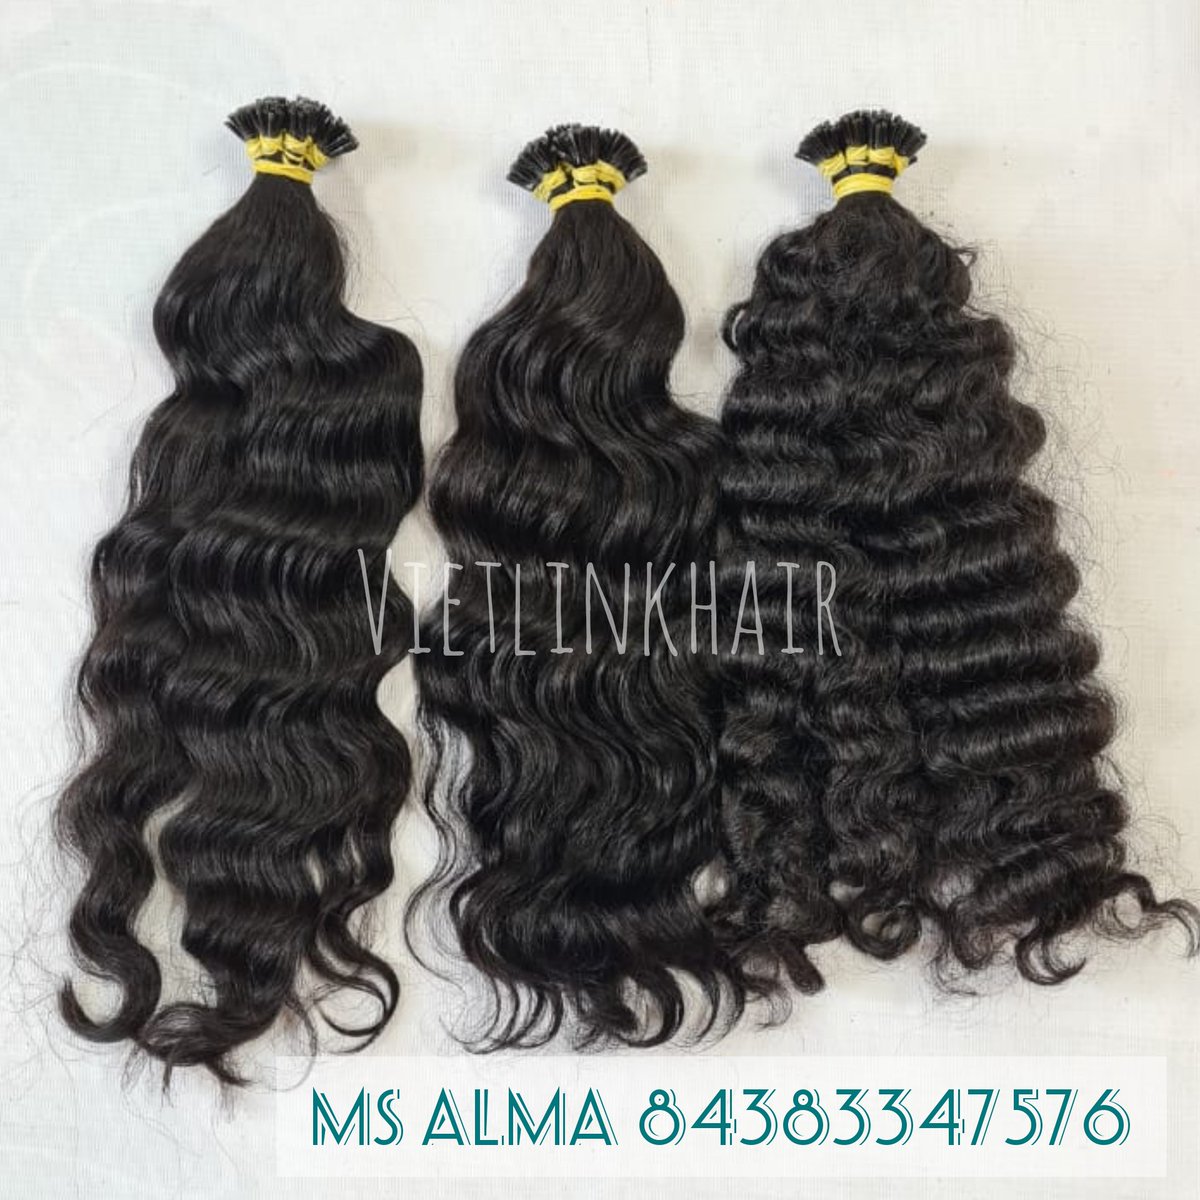 💥💥💥Wavy curly and Burmese curly texture 
💌 Contact me via WhatsApp for more information 👉
📞 +84 383347576 Ms Alma
❣️☘️❣️
#rawhair #rawhairvendor #hairwholesale  #bulkhairextensions #hairextensions #humanhairextensions #humanhair #rawhairvirginhair #hairwholesale #feedback